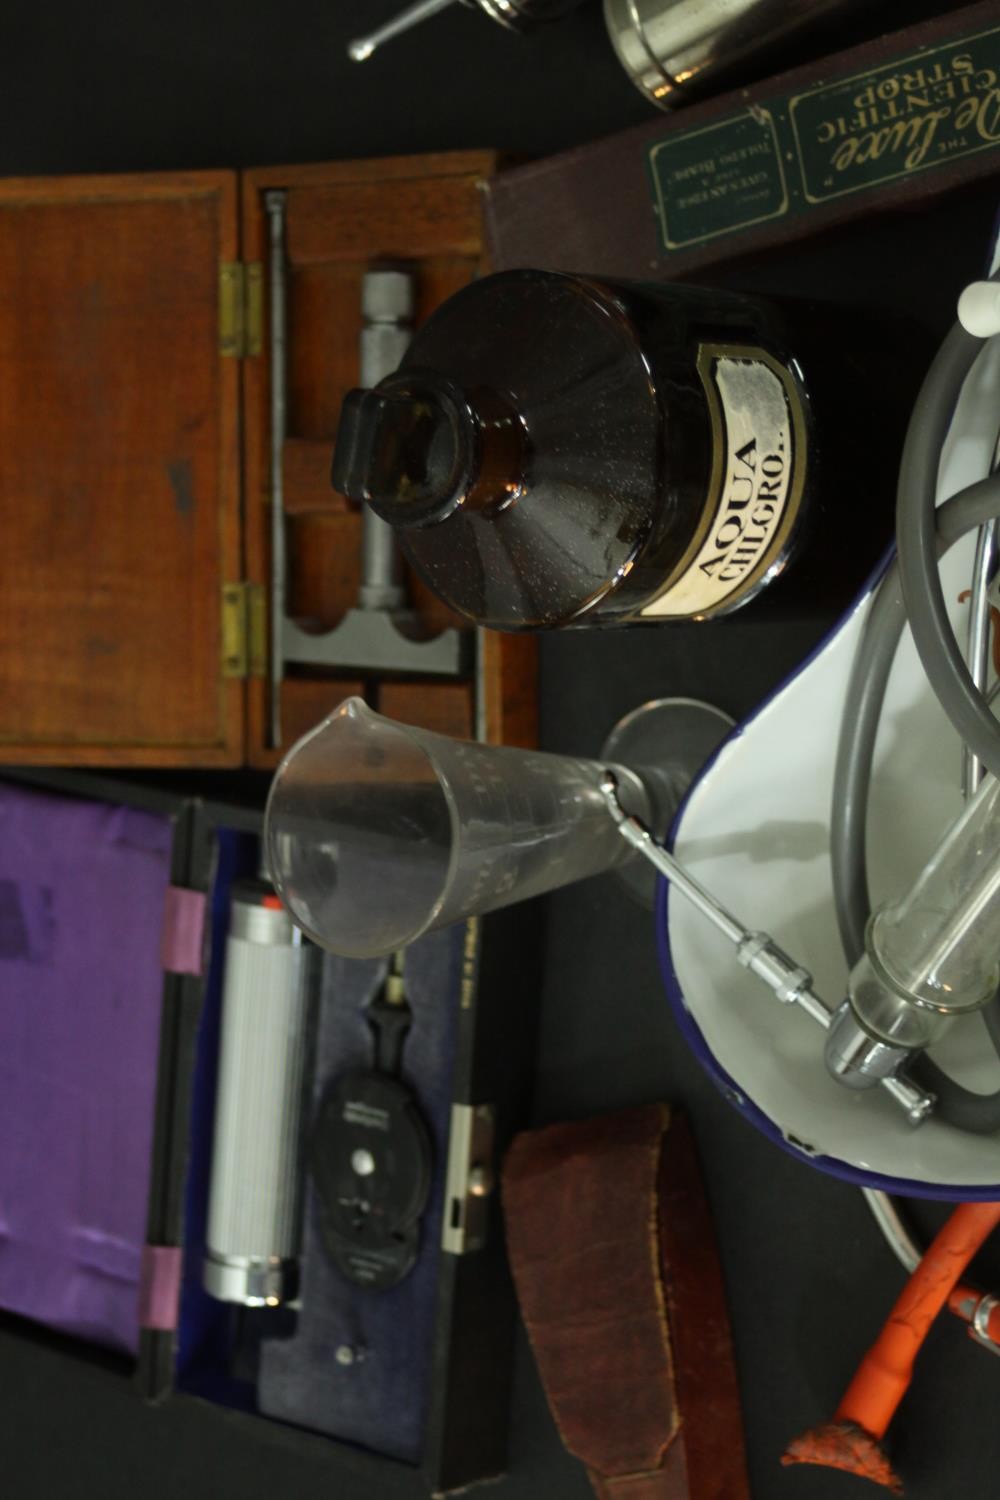 A collection of 19th and 20th century medical equipment and instruments, including syringes, a - Image 4 of 14